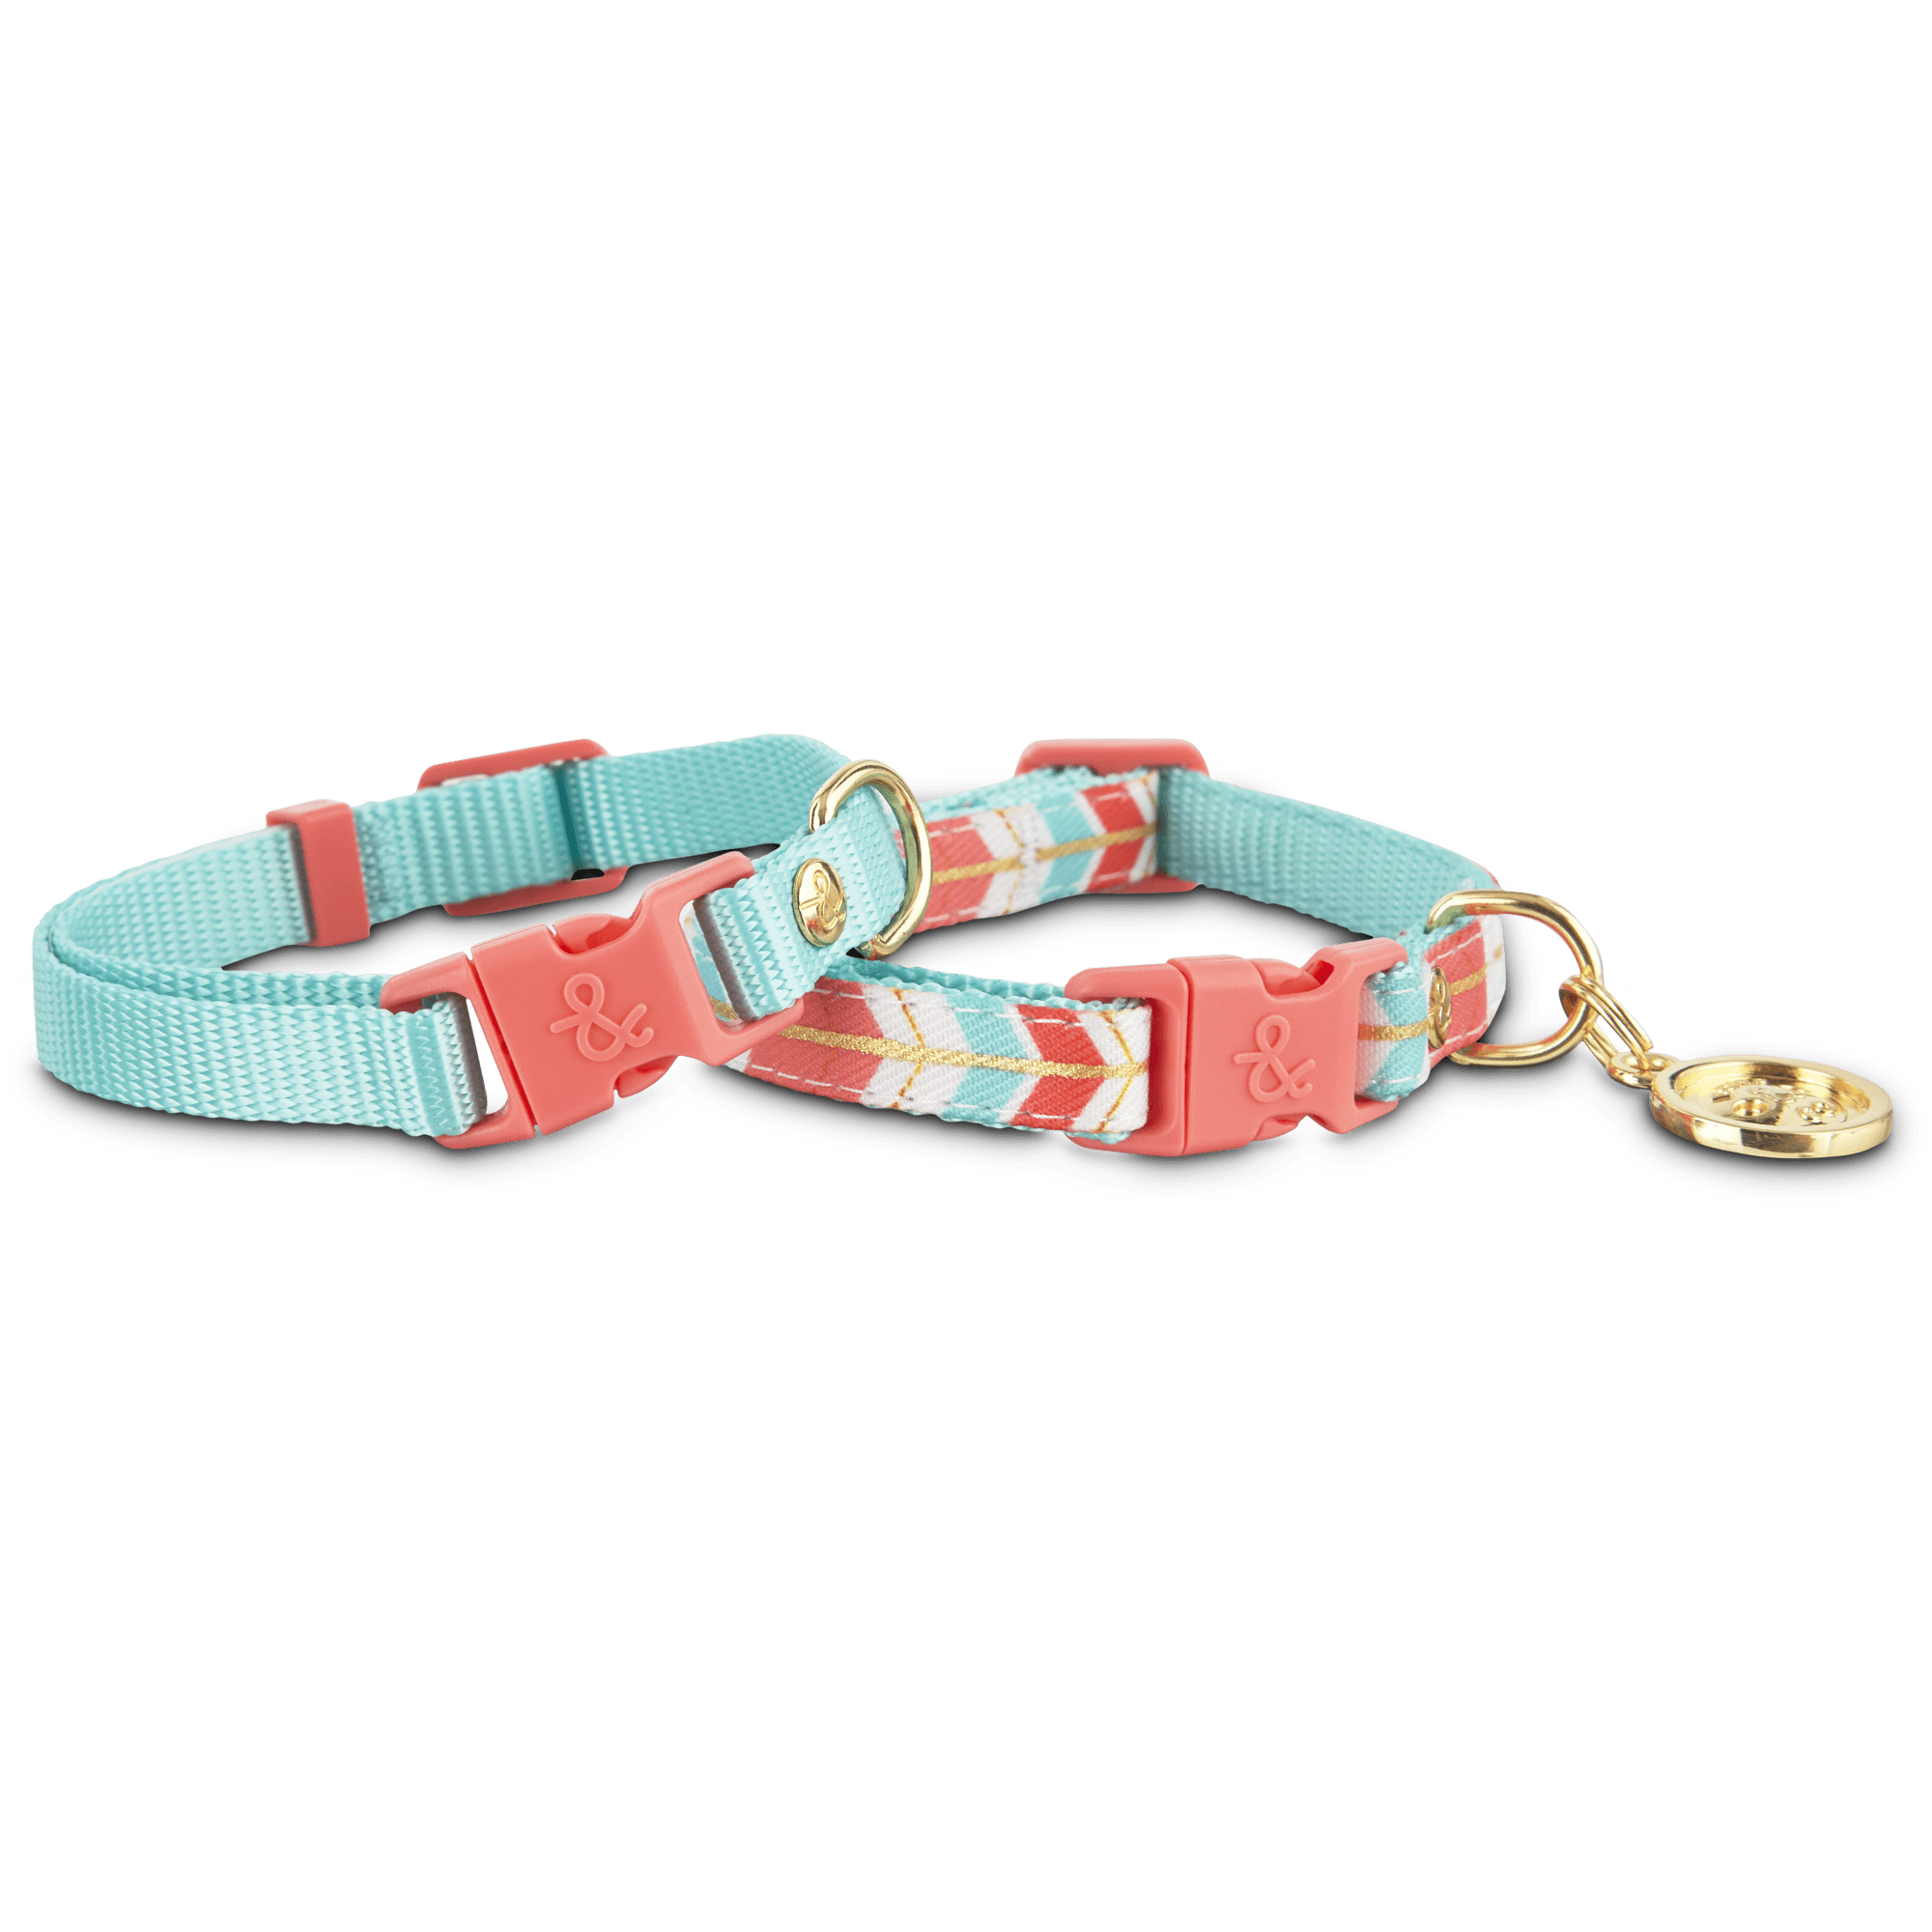 Cute Dog Collars For Small Dogs